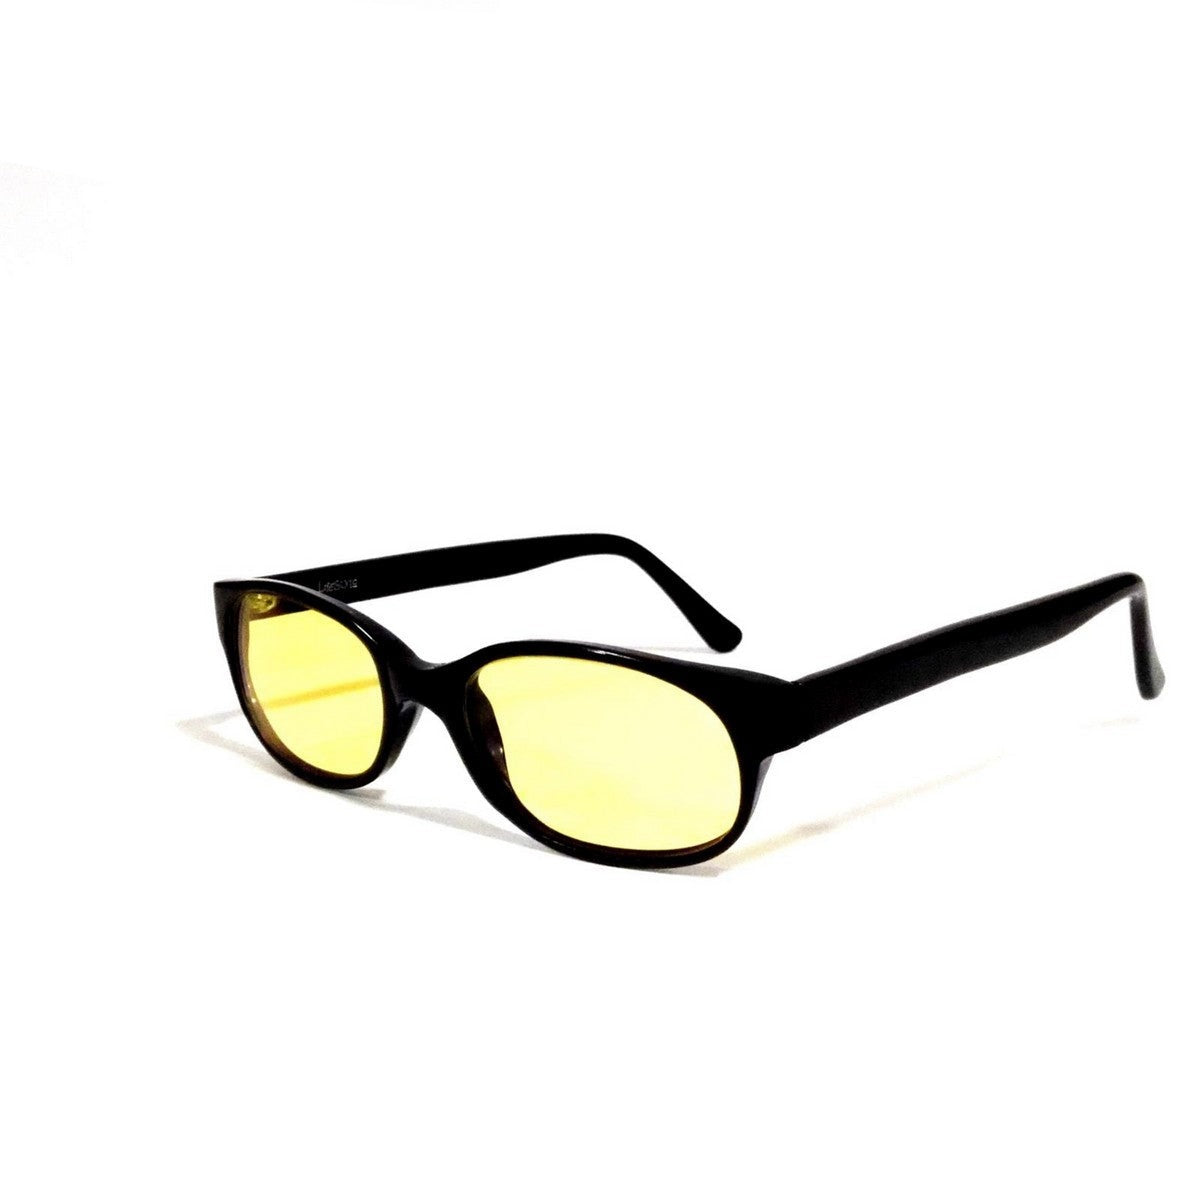 Night Driving Glasses for Men and Women with Anti Glare Coating